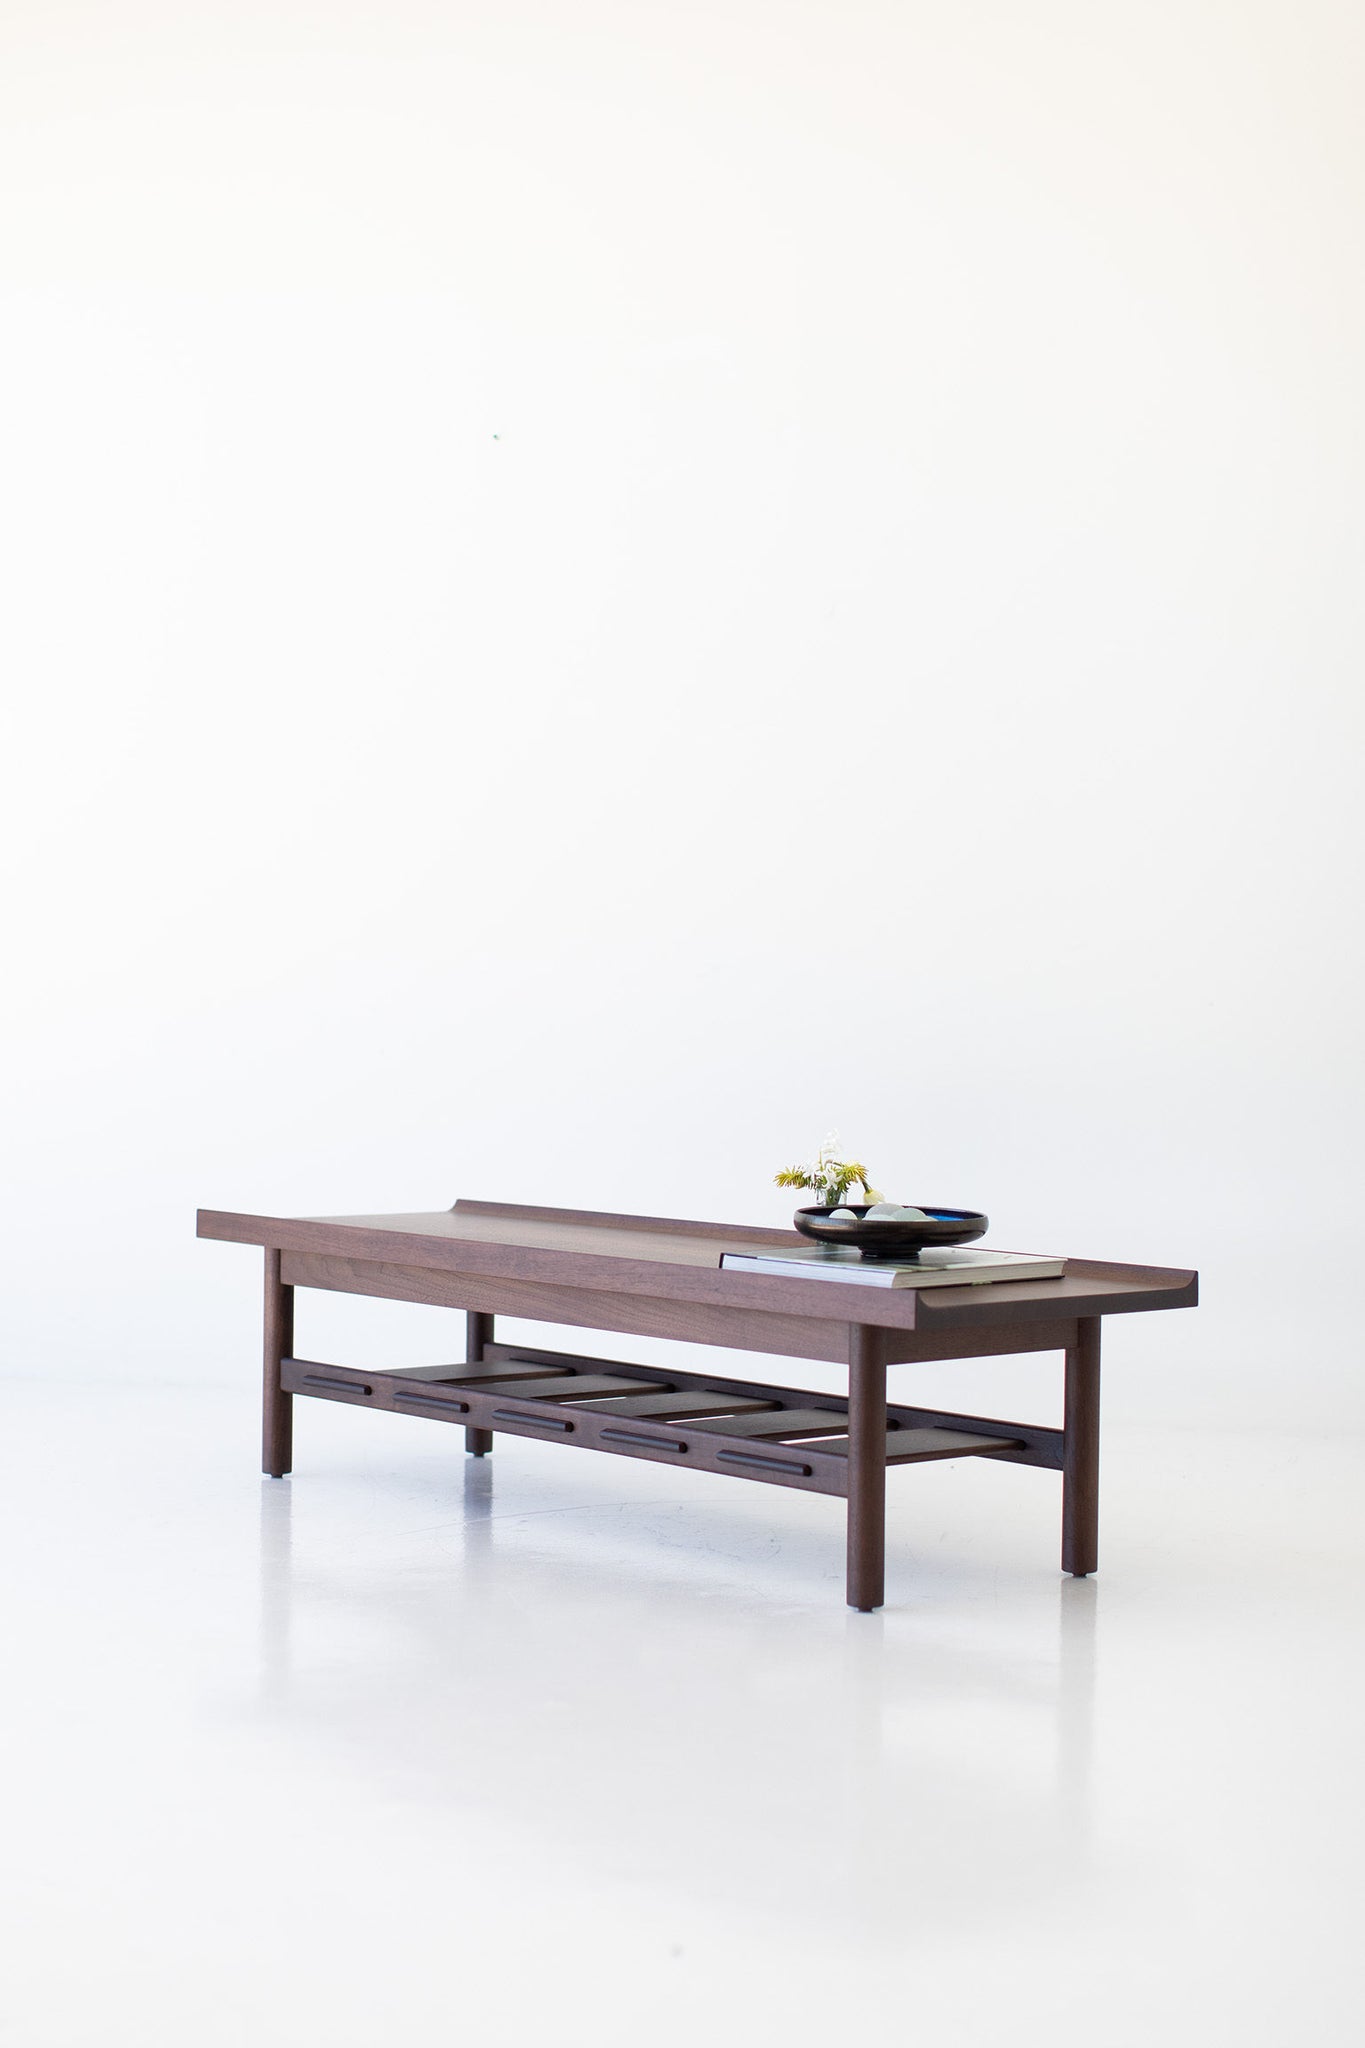 Lawrence Peabody Modern Coffee Table 2009 Craft Associates Furniture, Image 08